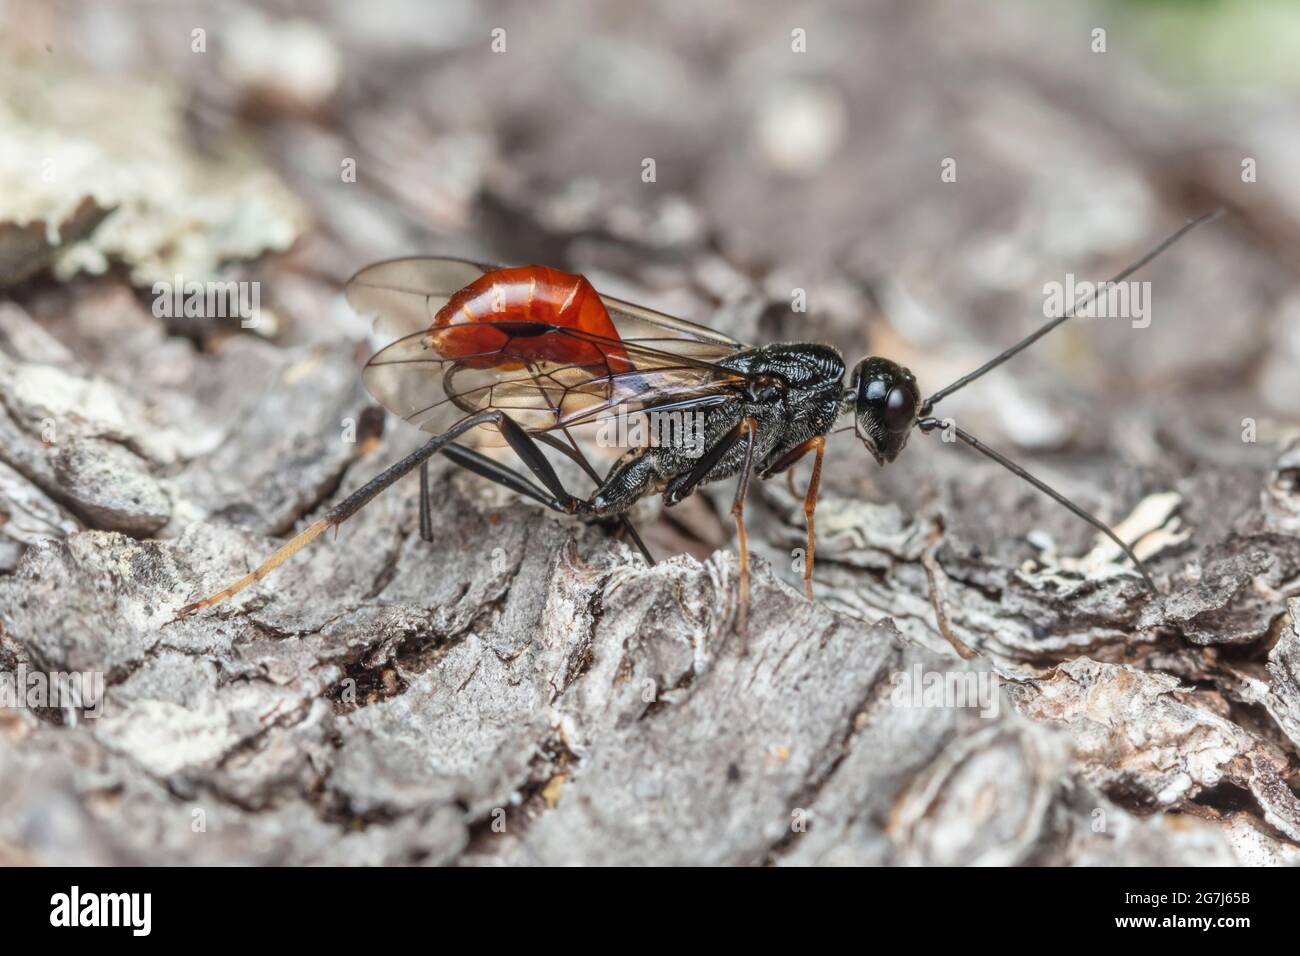 A female Aulacid Wasp (Pristaulacus sp.) ovipositing on a dead Eastern White Pine (Pinus strobus) tree. Stock Photo